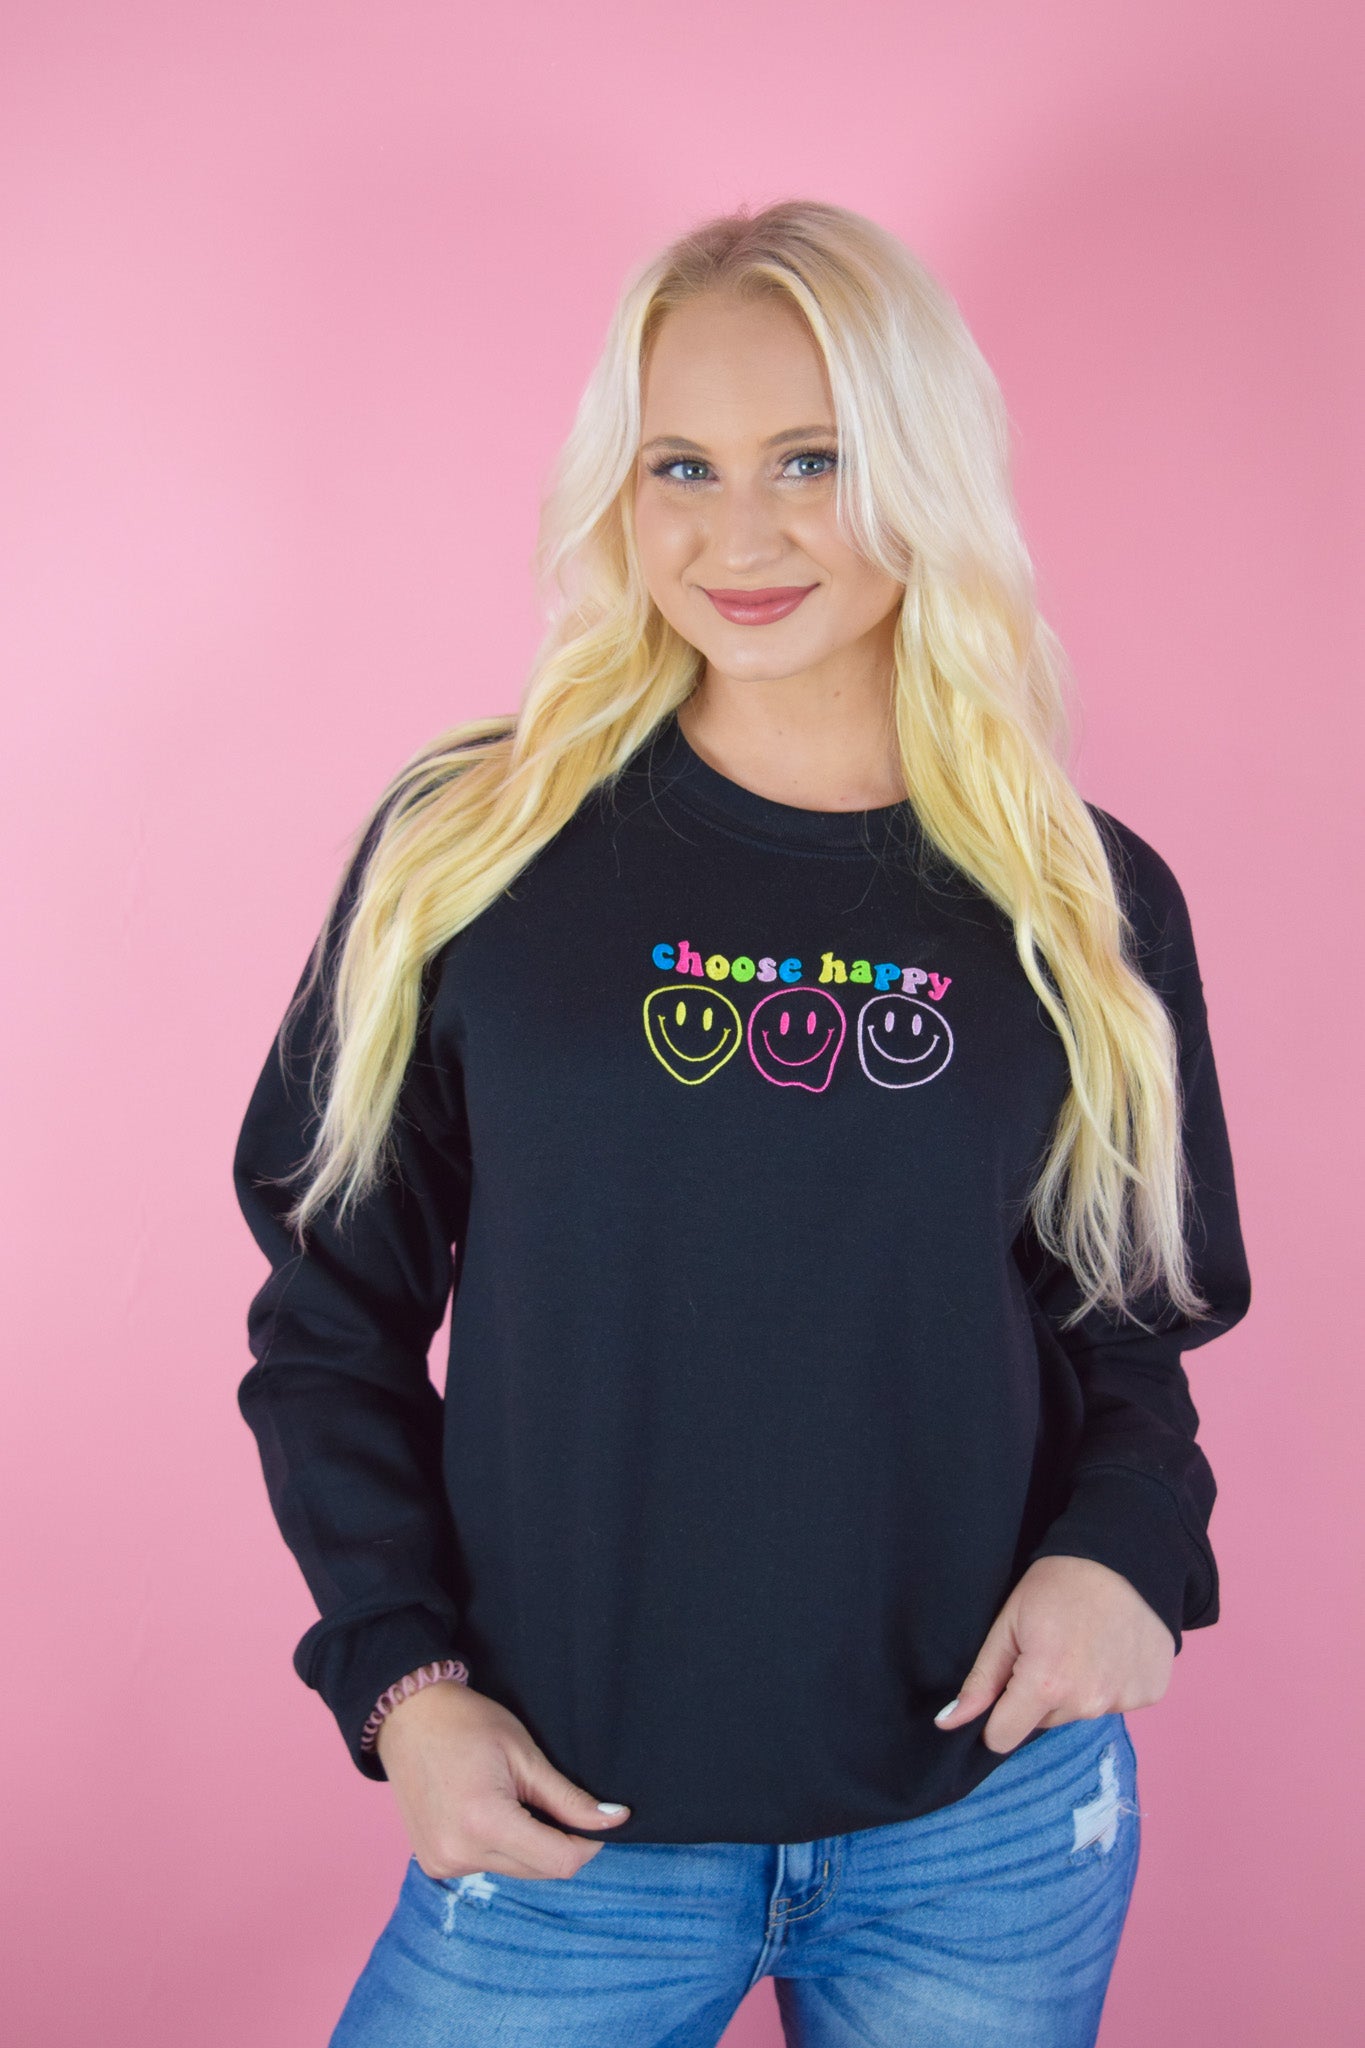 CHOOSE HAPPY EMBROIDERED SWEATER